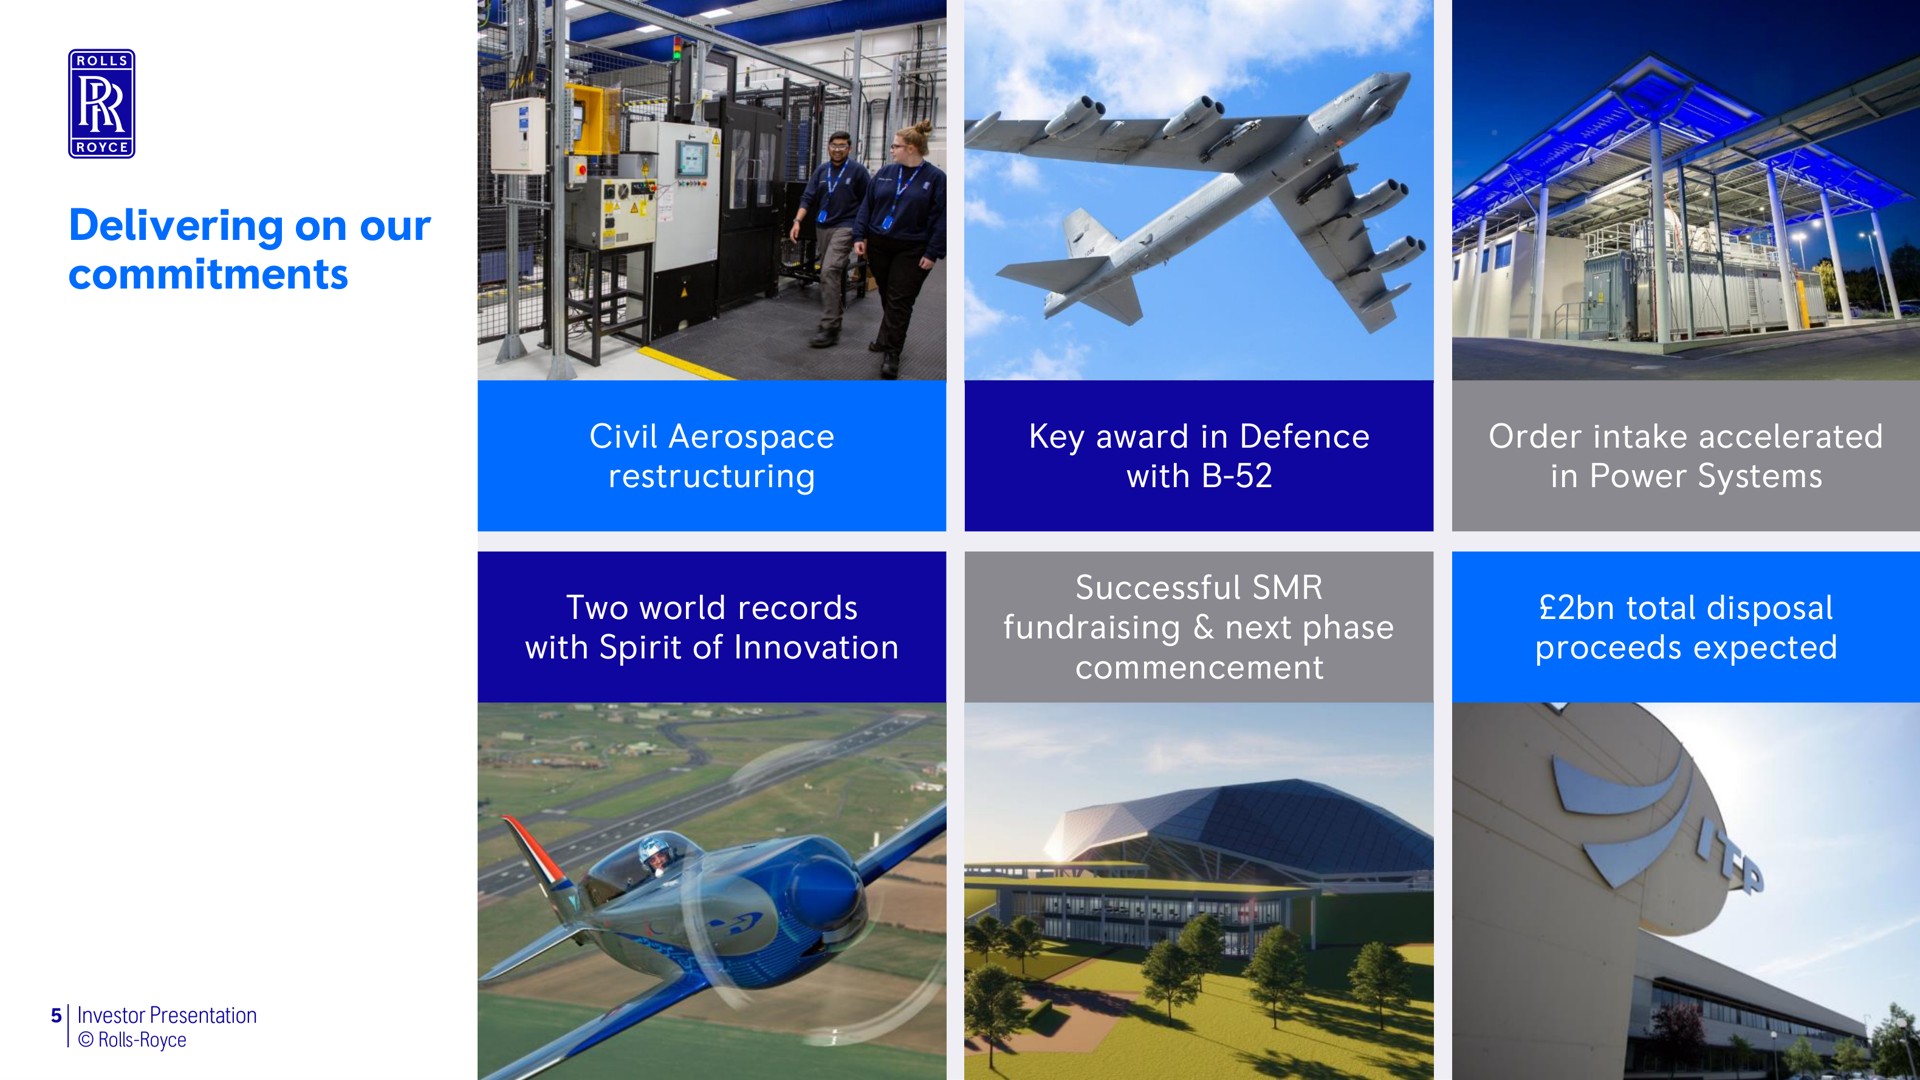 delivering on our commitments civil key award in defence with order intake accelerated in power systems two world records with spirit of innovation successful next phase commencement total disposal proceeds expected soy | Rolls-Royce Holdings